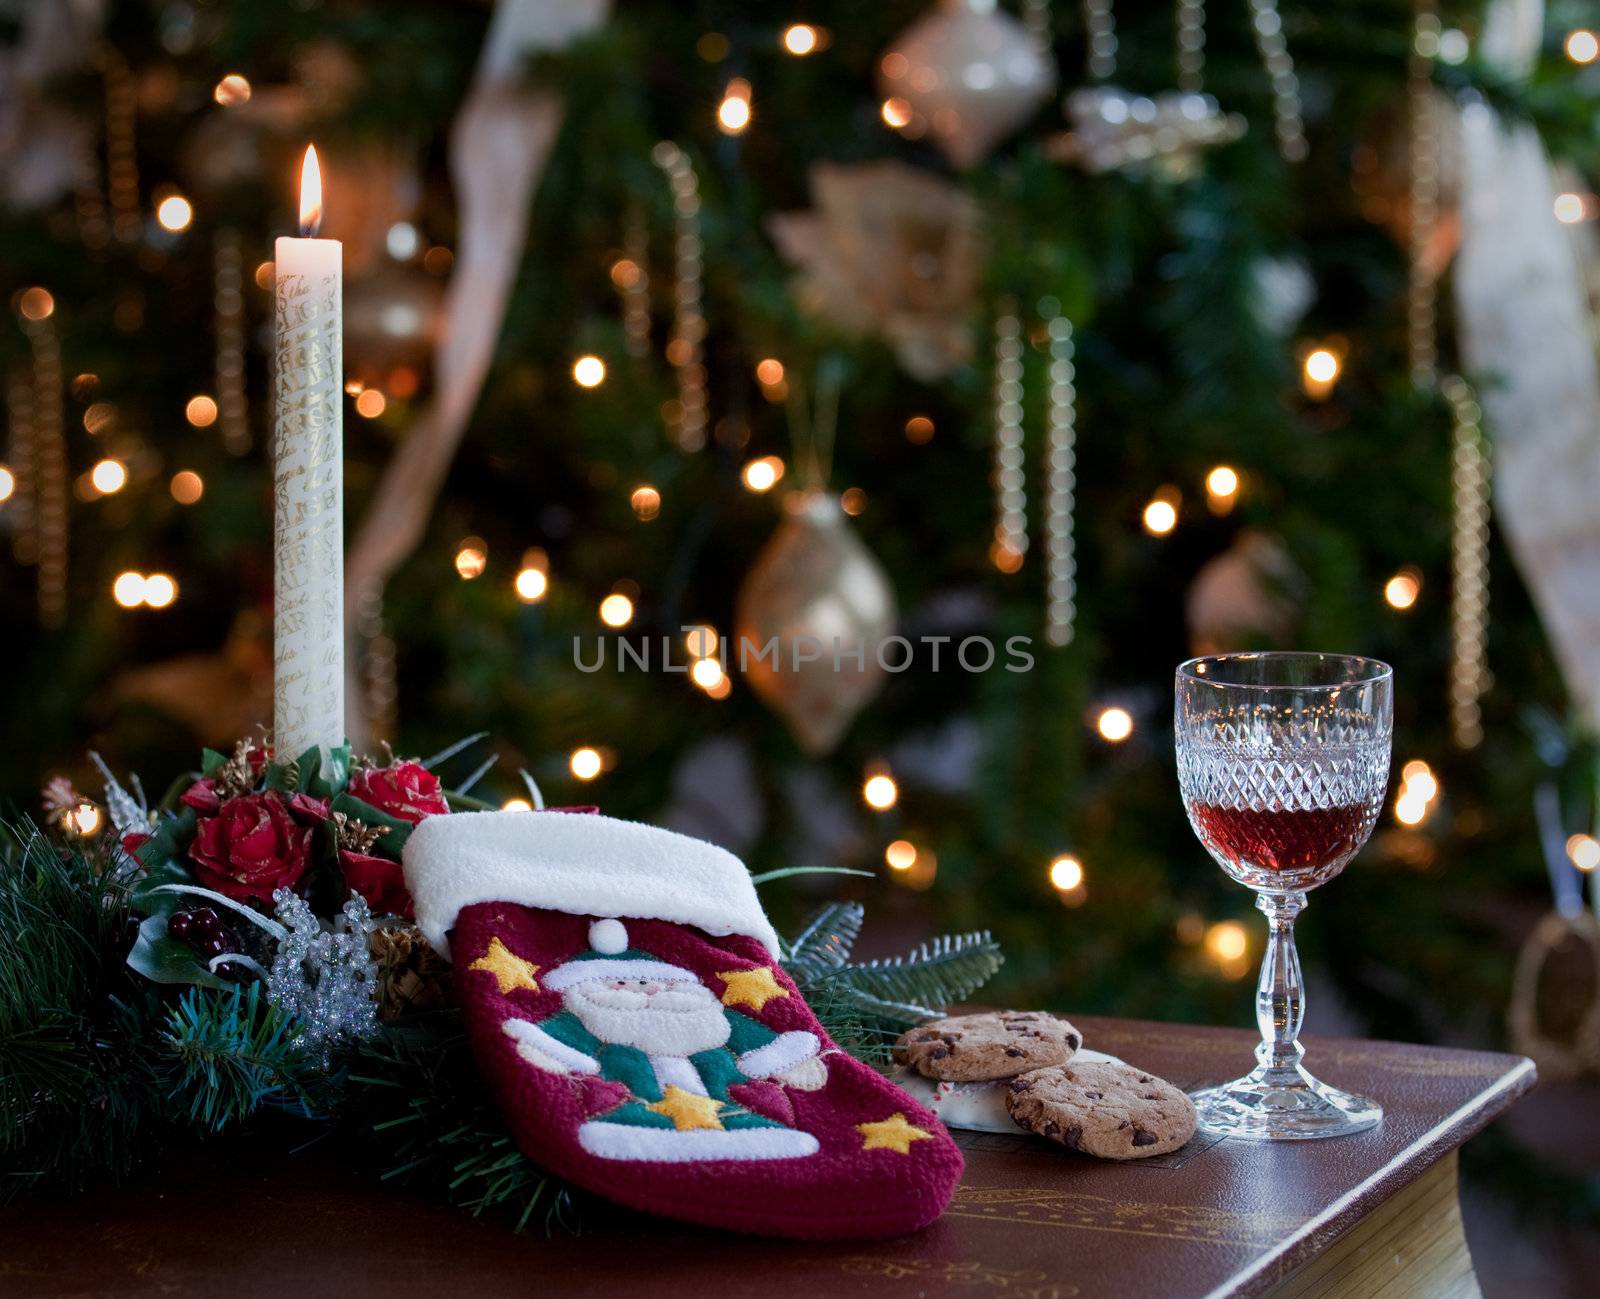 Glass of sherry or wine with cookies and embroidered stocking for gifts